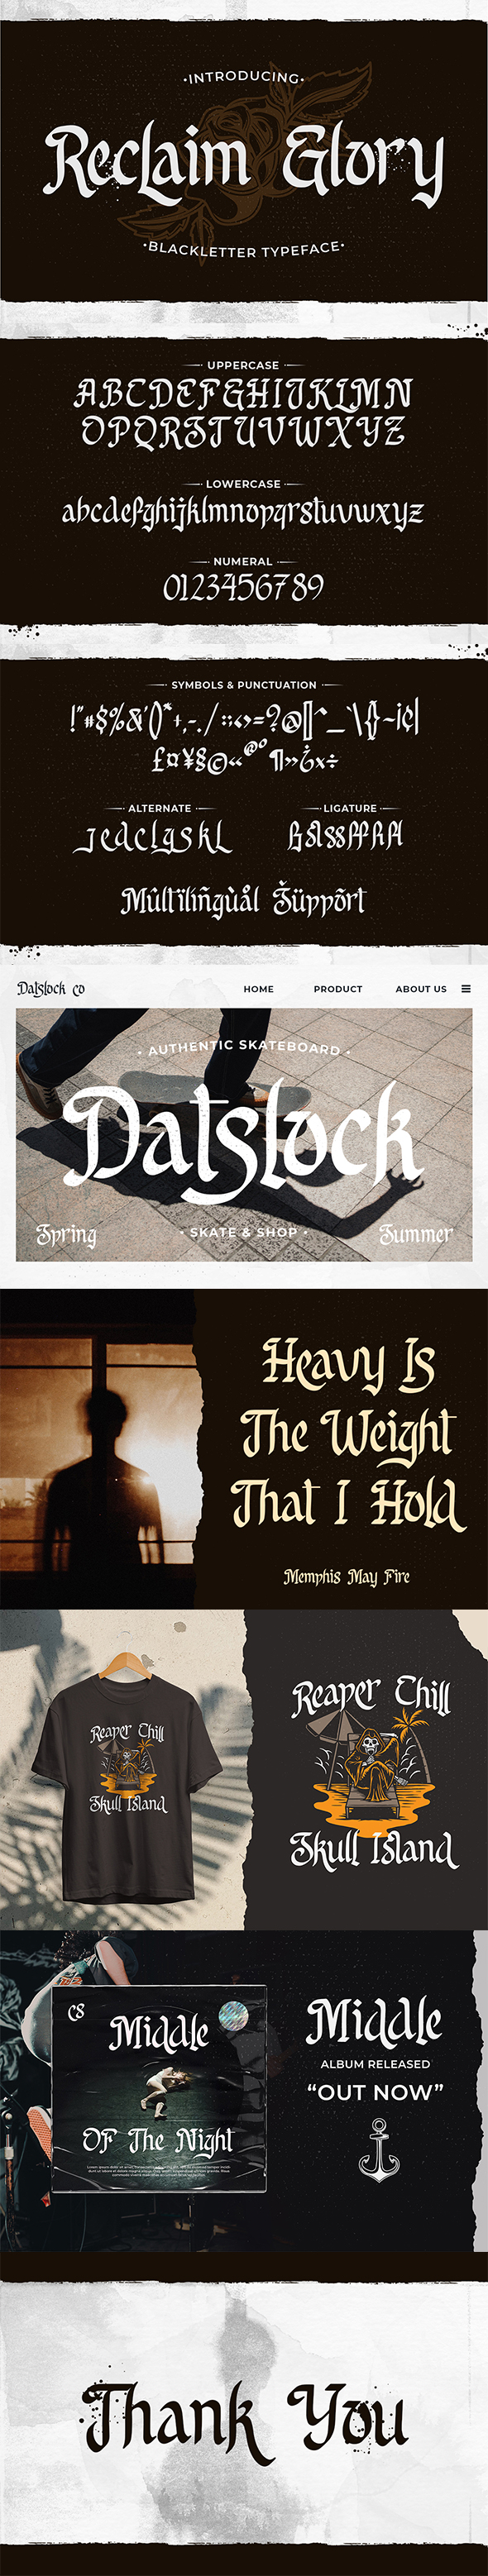 [DOWNLOAD]Reclaim Glory – Blackletter Typeface